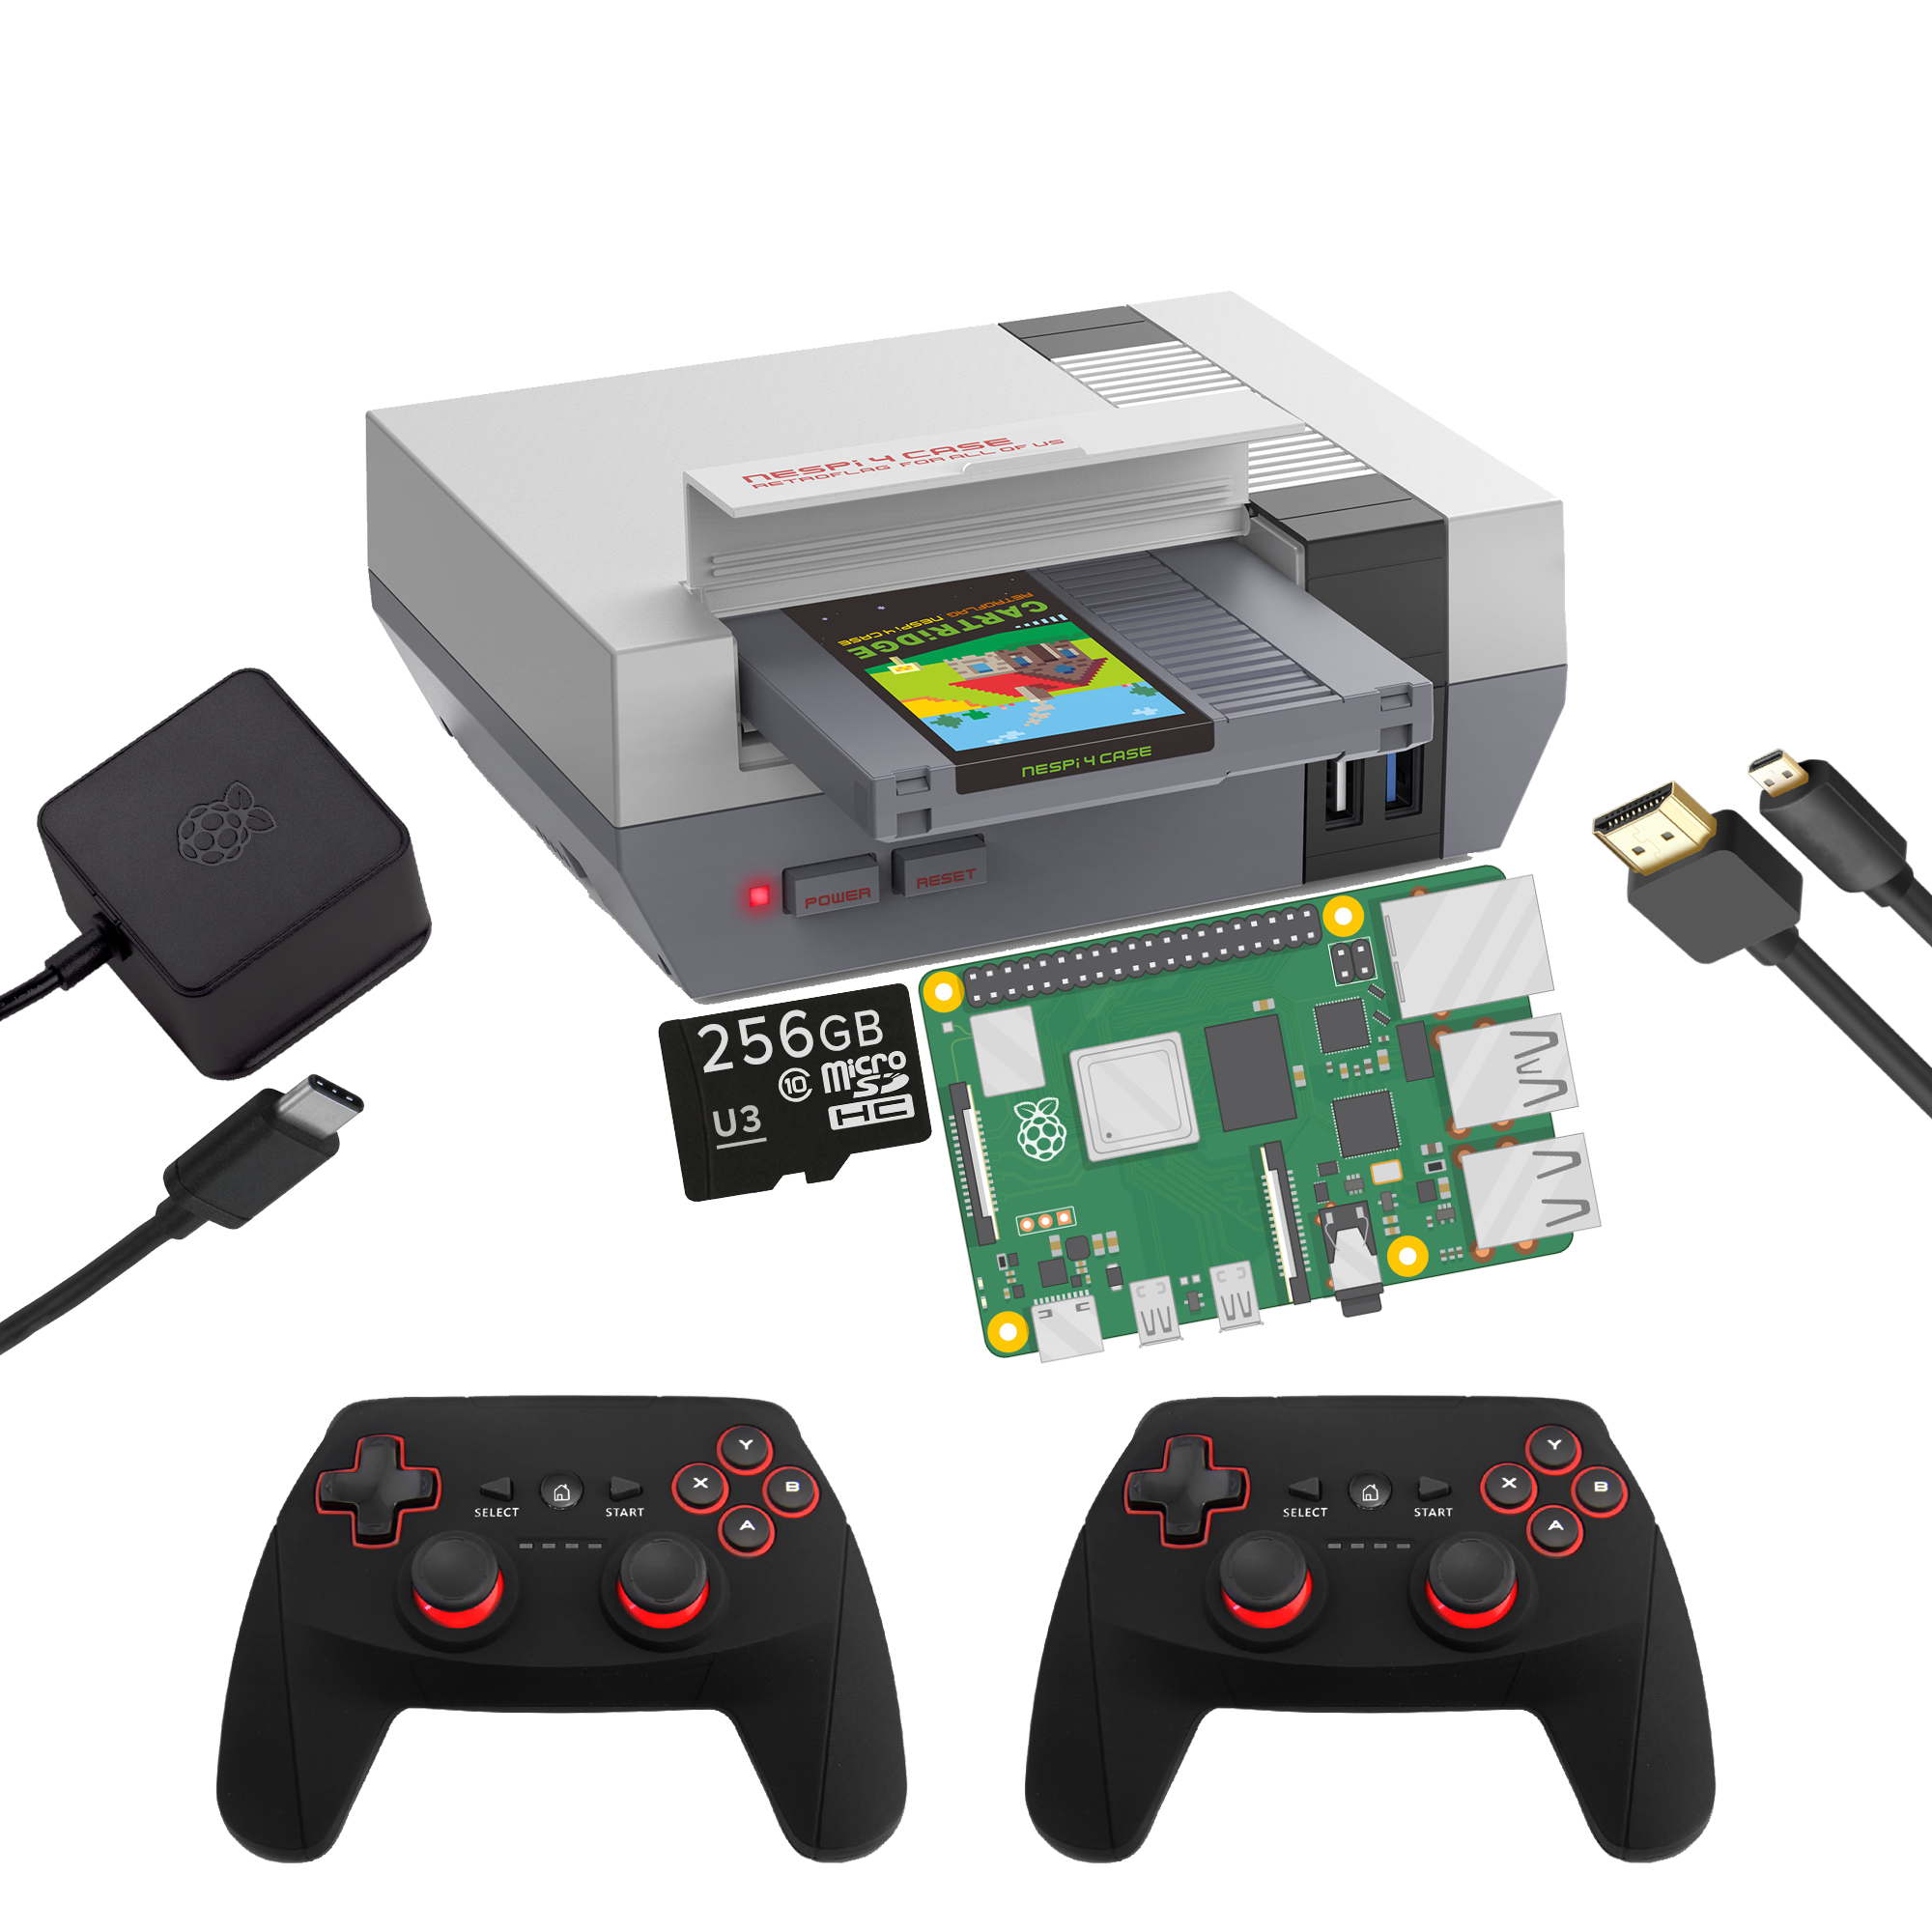 RETROFLAG NESPi 4 DIY Starting Kit for RetroPie Home Console - Showing everything included (R1 Gamepads)